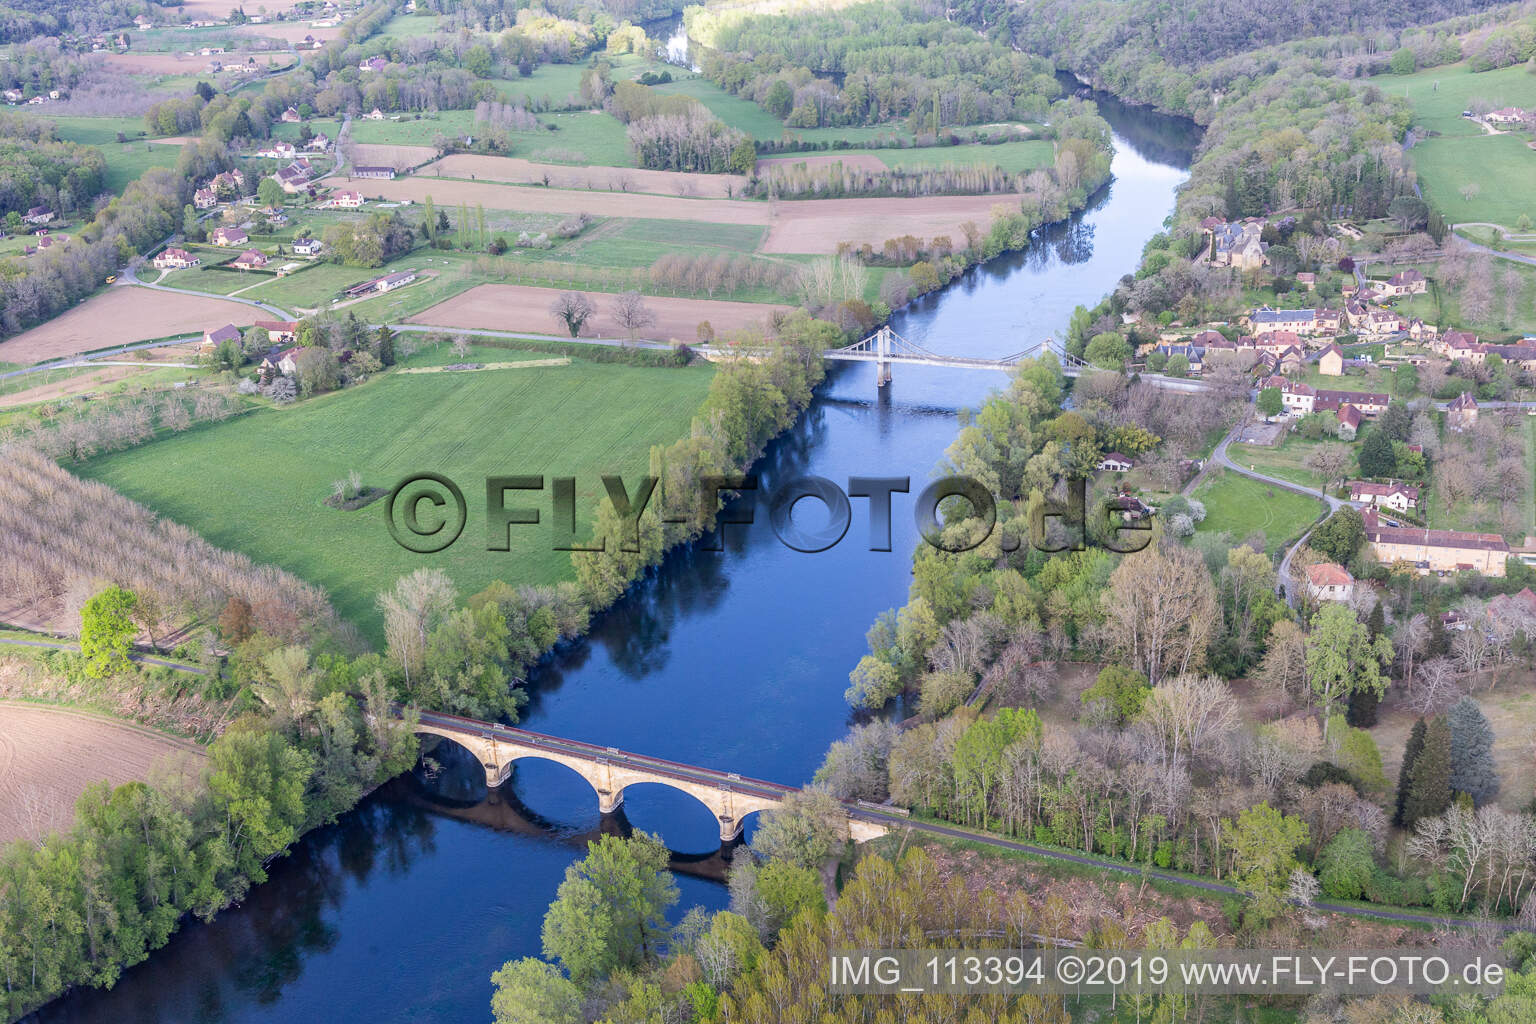 Aerial view of Dordogne in Carsac-Aillac in the state Dordogne, France